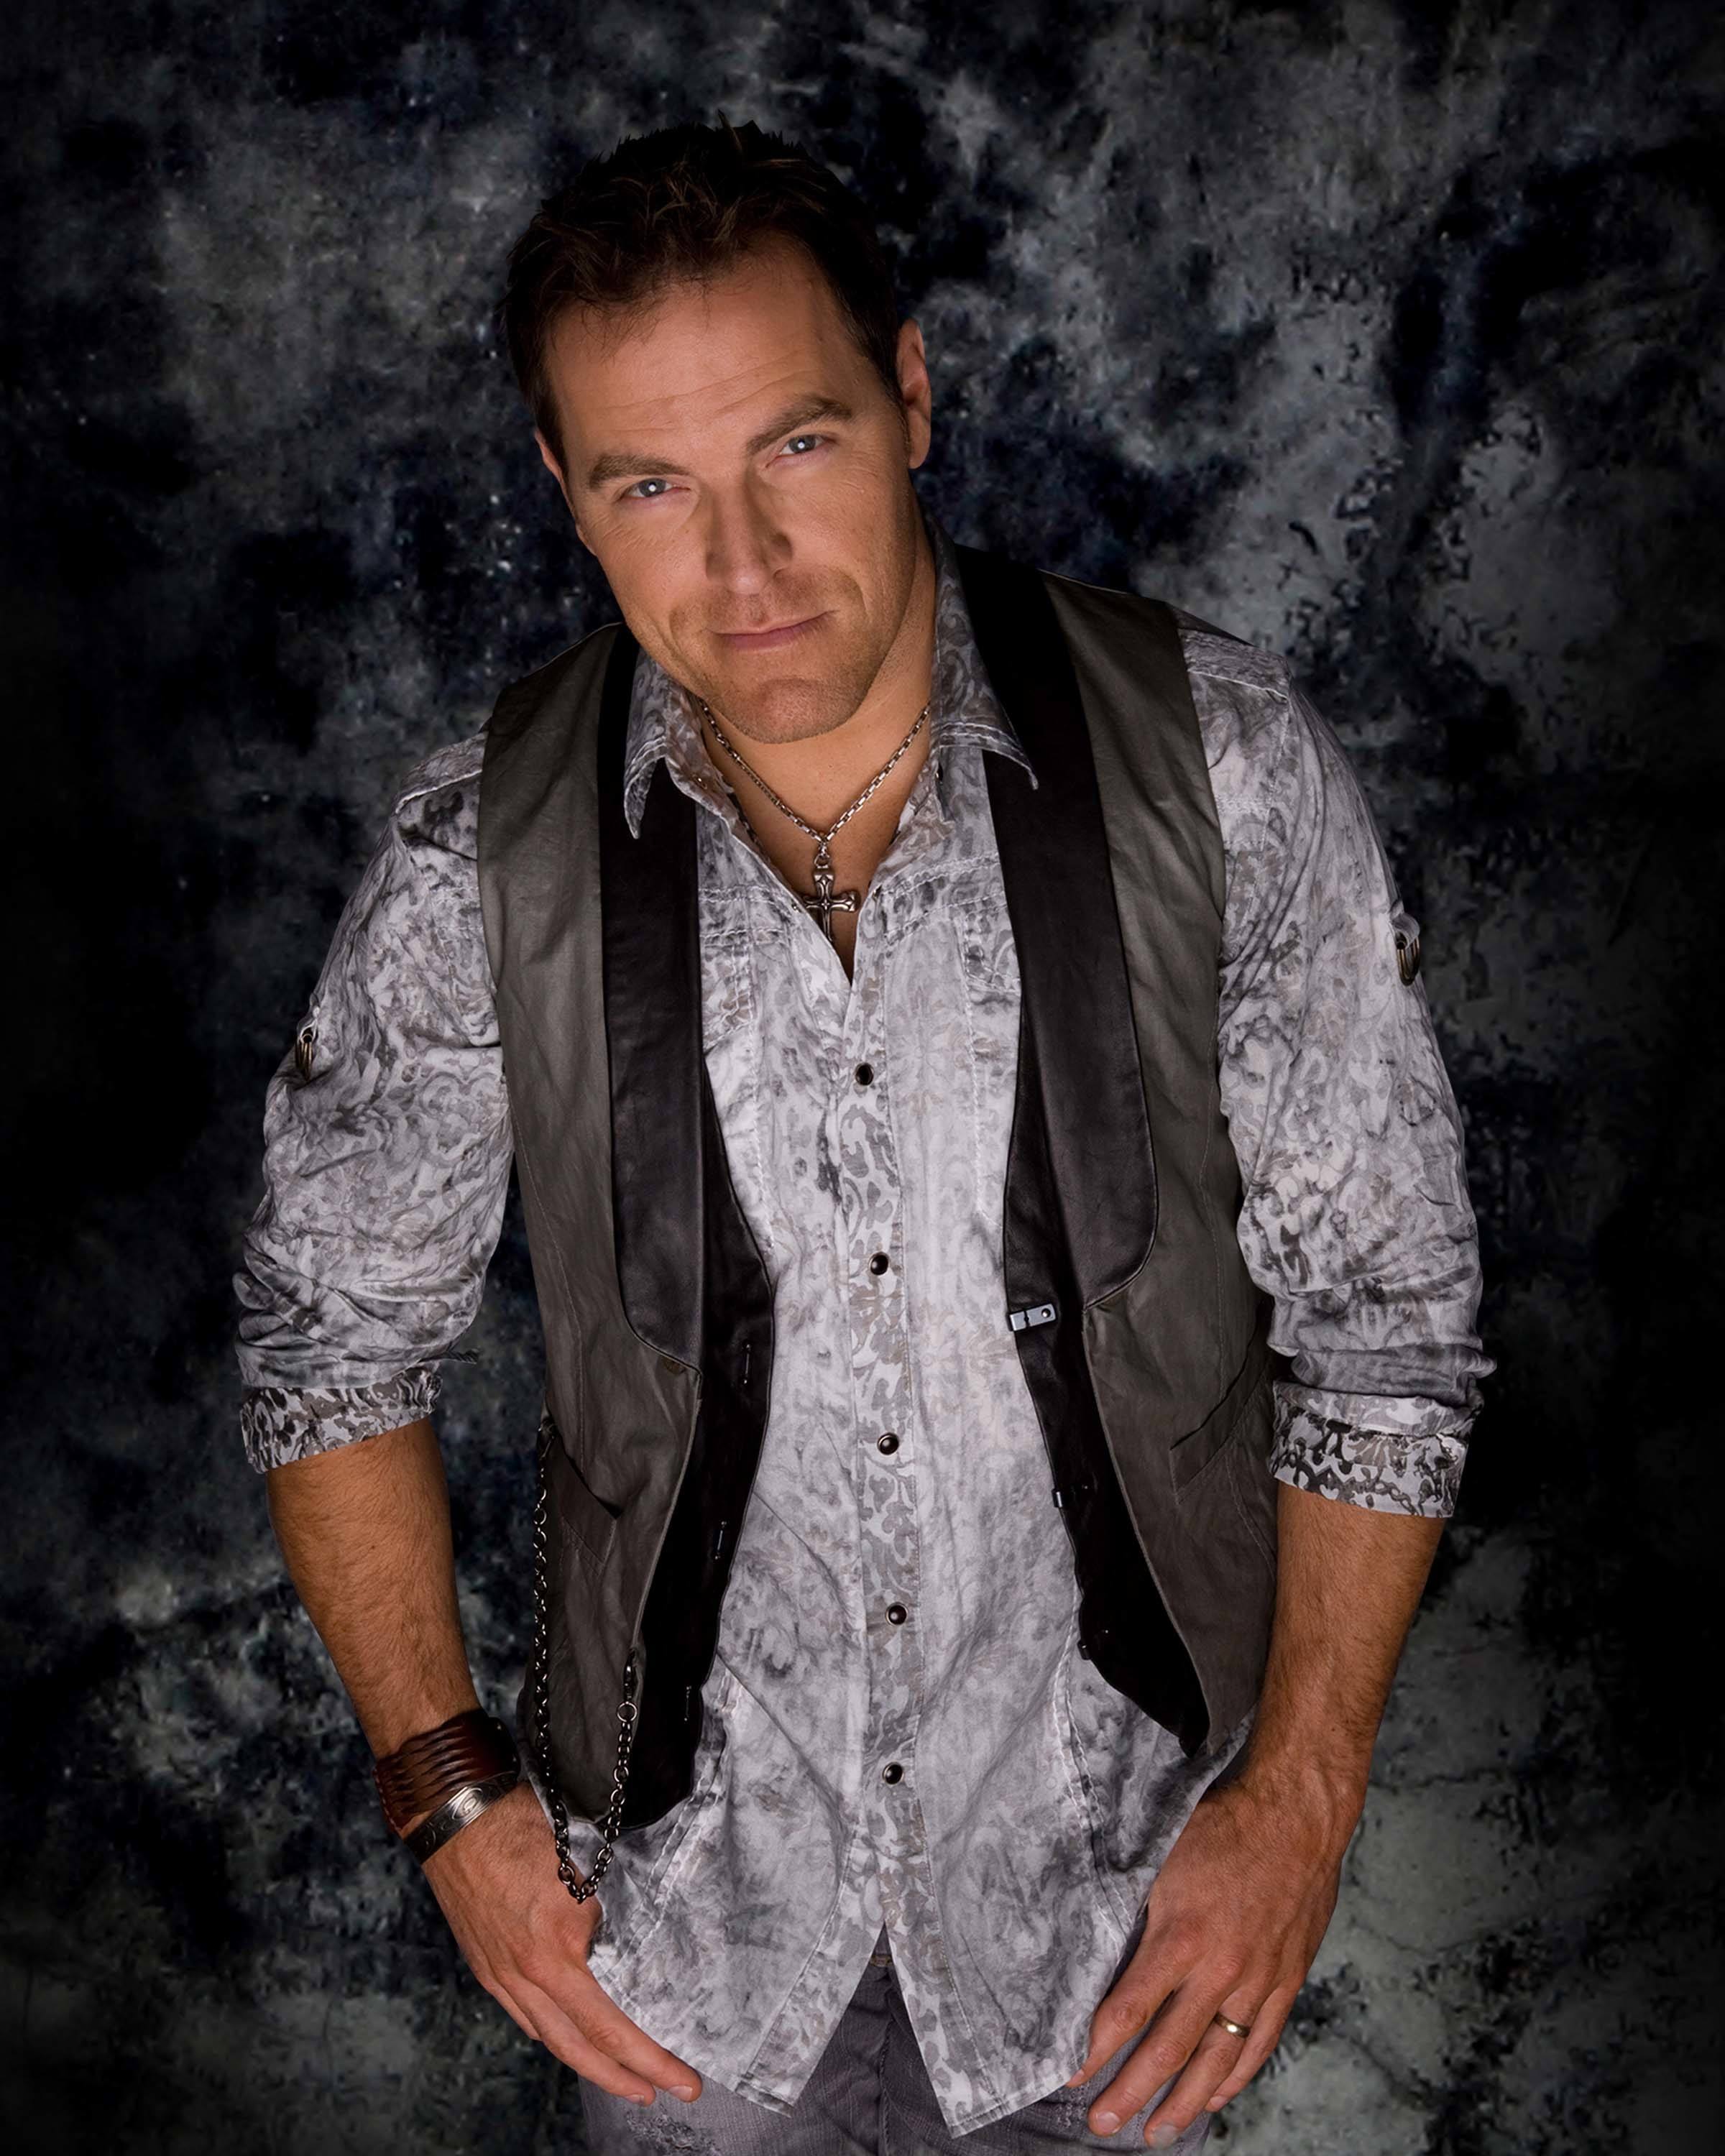 MISSION - Singer George Canyon performs in Red Deer on Sept. 7 in support of Fountain of Life Ministries